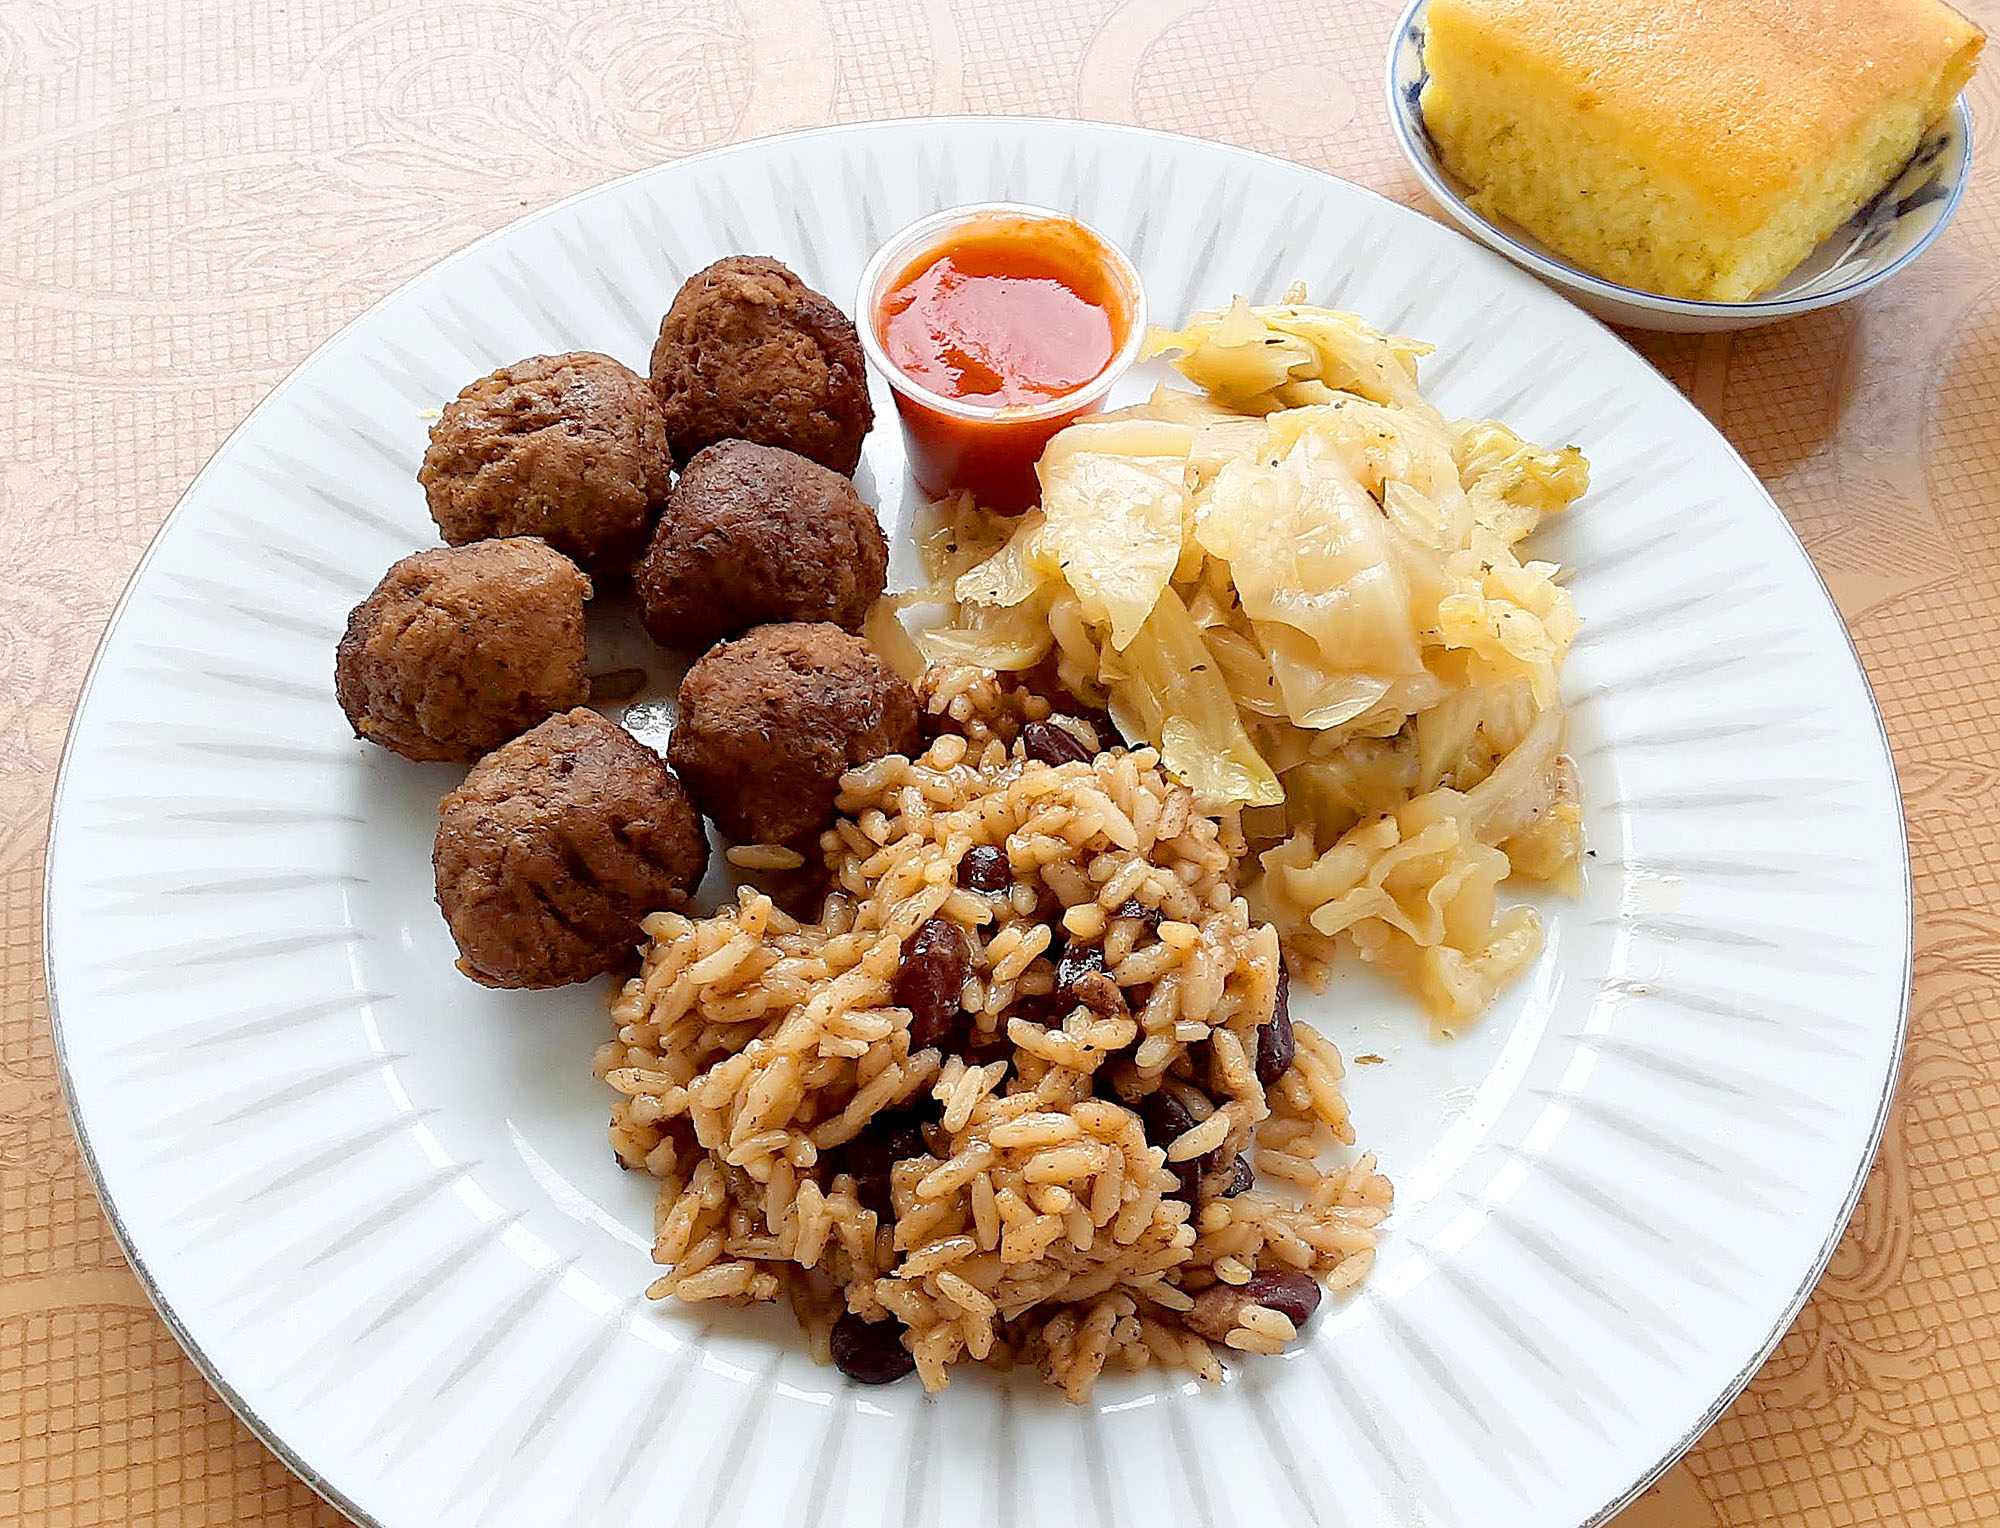 On a white plate, there are beef balls with a tiny cup and a side of rice with beans and cabbage. Photo by Paul Young.